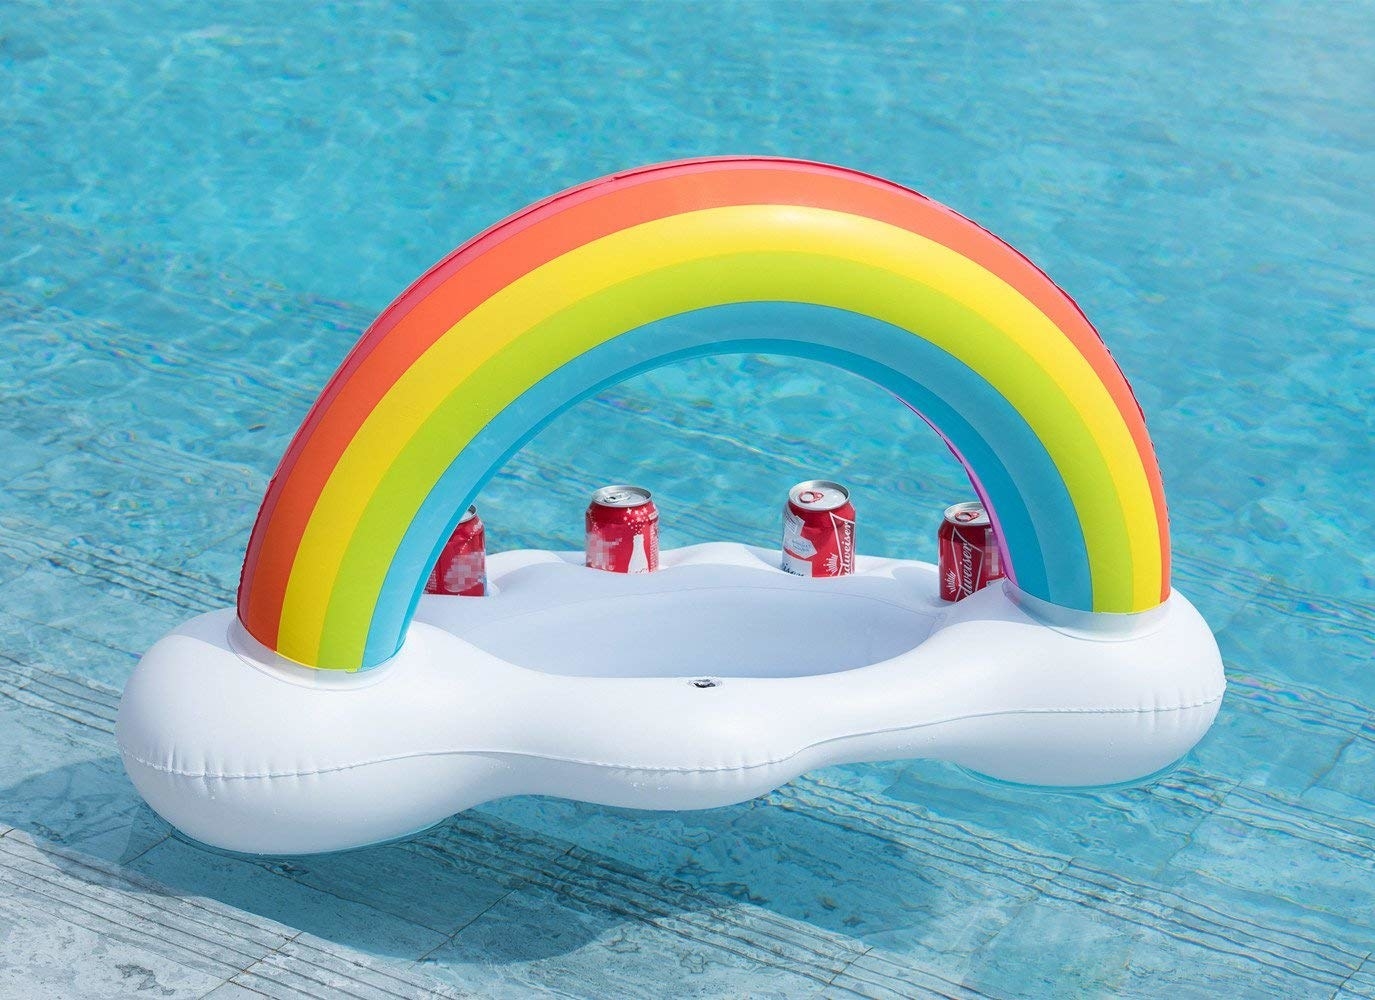 a rainbow blow up float attached to a cloud that acts as a cooler